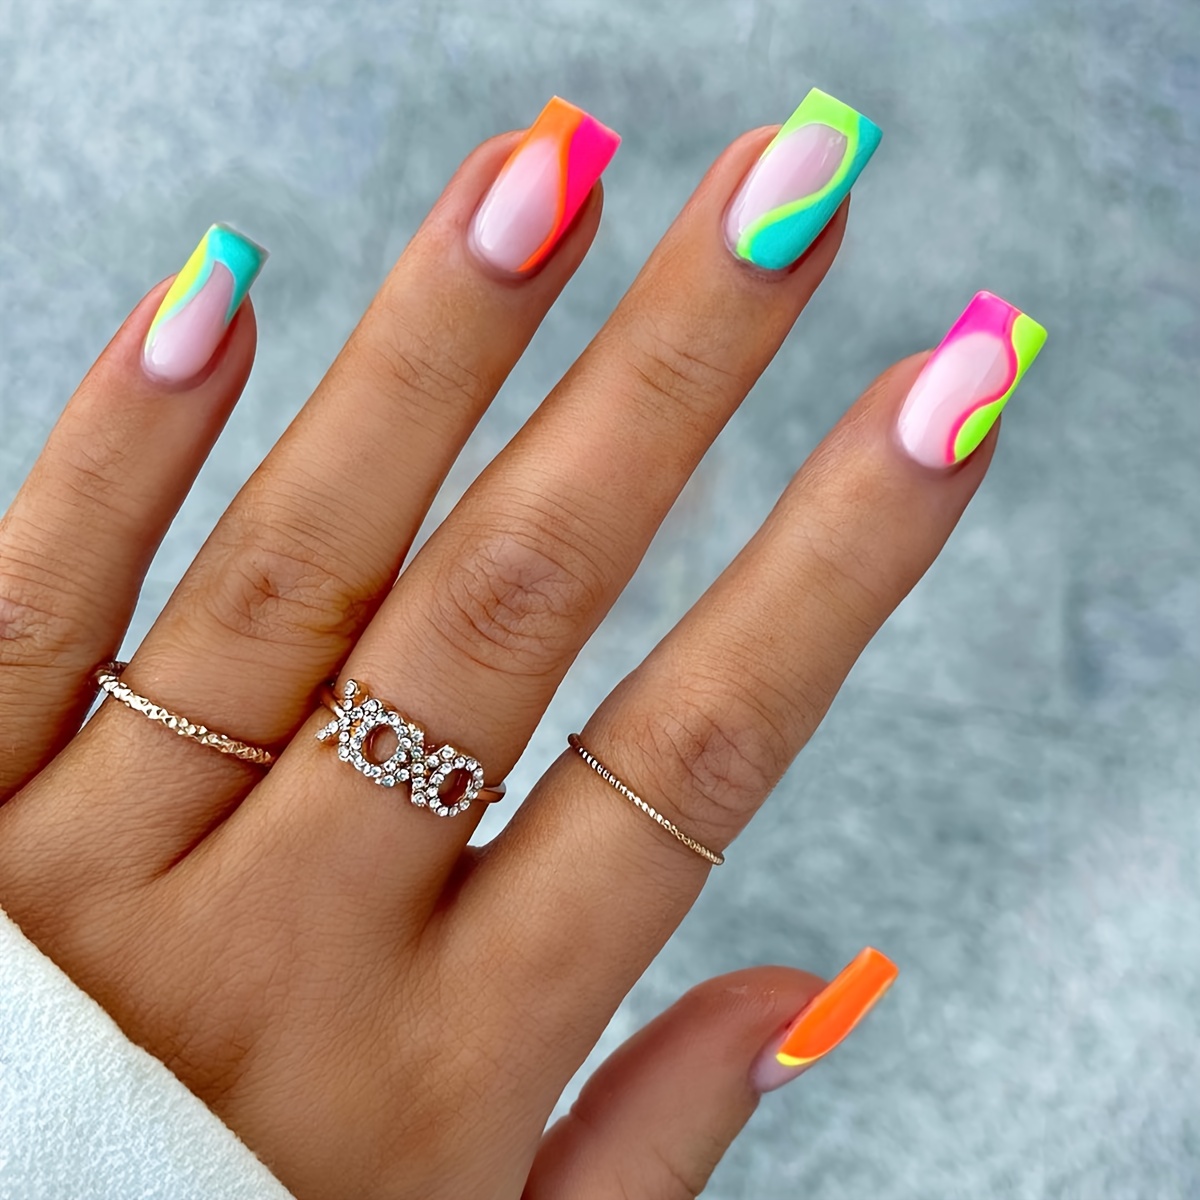 

24pcs Glossy Medium Square Fake Nails, Pinkish Press On Nails With Colorful Stripe Design Sweet And Cute False Nails For Women Girls